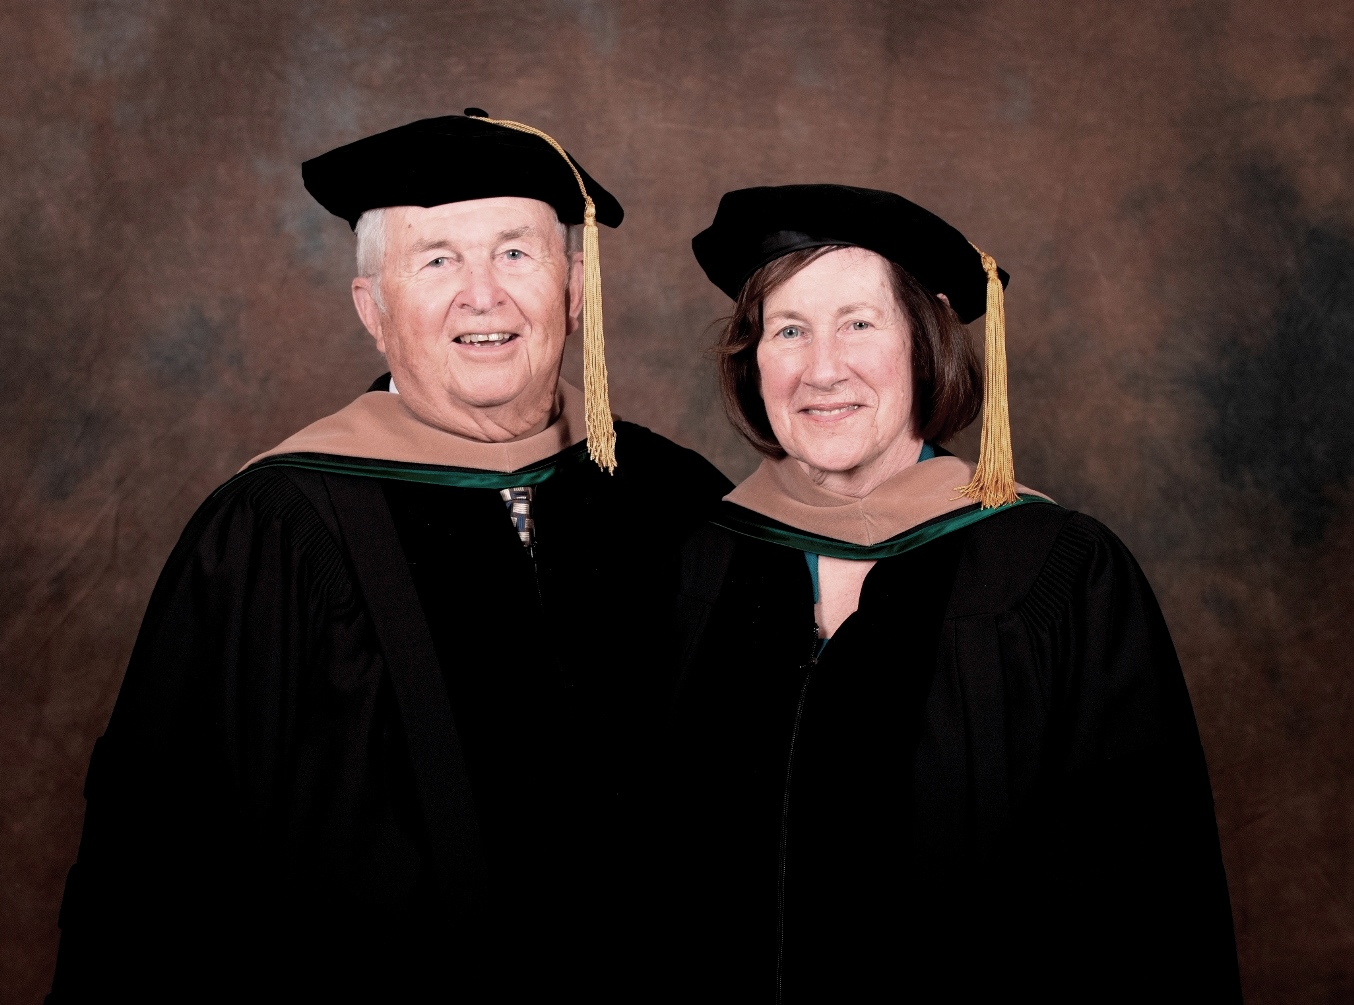 Mary Ellen graduated from nursing school in Boston and returned to Bangor to work at the “old” St. Joseph Hospital. Ed transferred to Husson College to obtain an education that would support a family. While in school, he balanced a full course load while working 40 hours a week at his dad’s automobile business. Ed graduated from Husson in 1964 and two years later started Downeast Toyota in Brewer. In 2005, Ed was invited to be a member of the Husson University Board of Trustees. As their business success evolved, the Darlings have “given back” to Husson because they believe in the University’s mission.